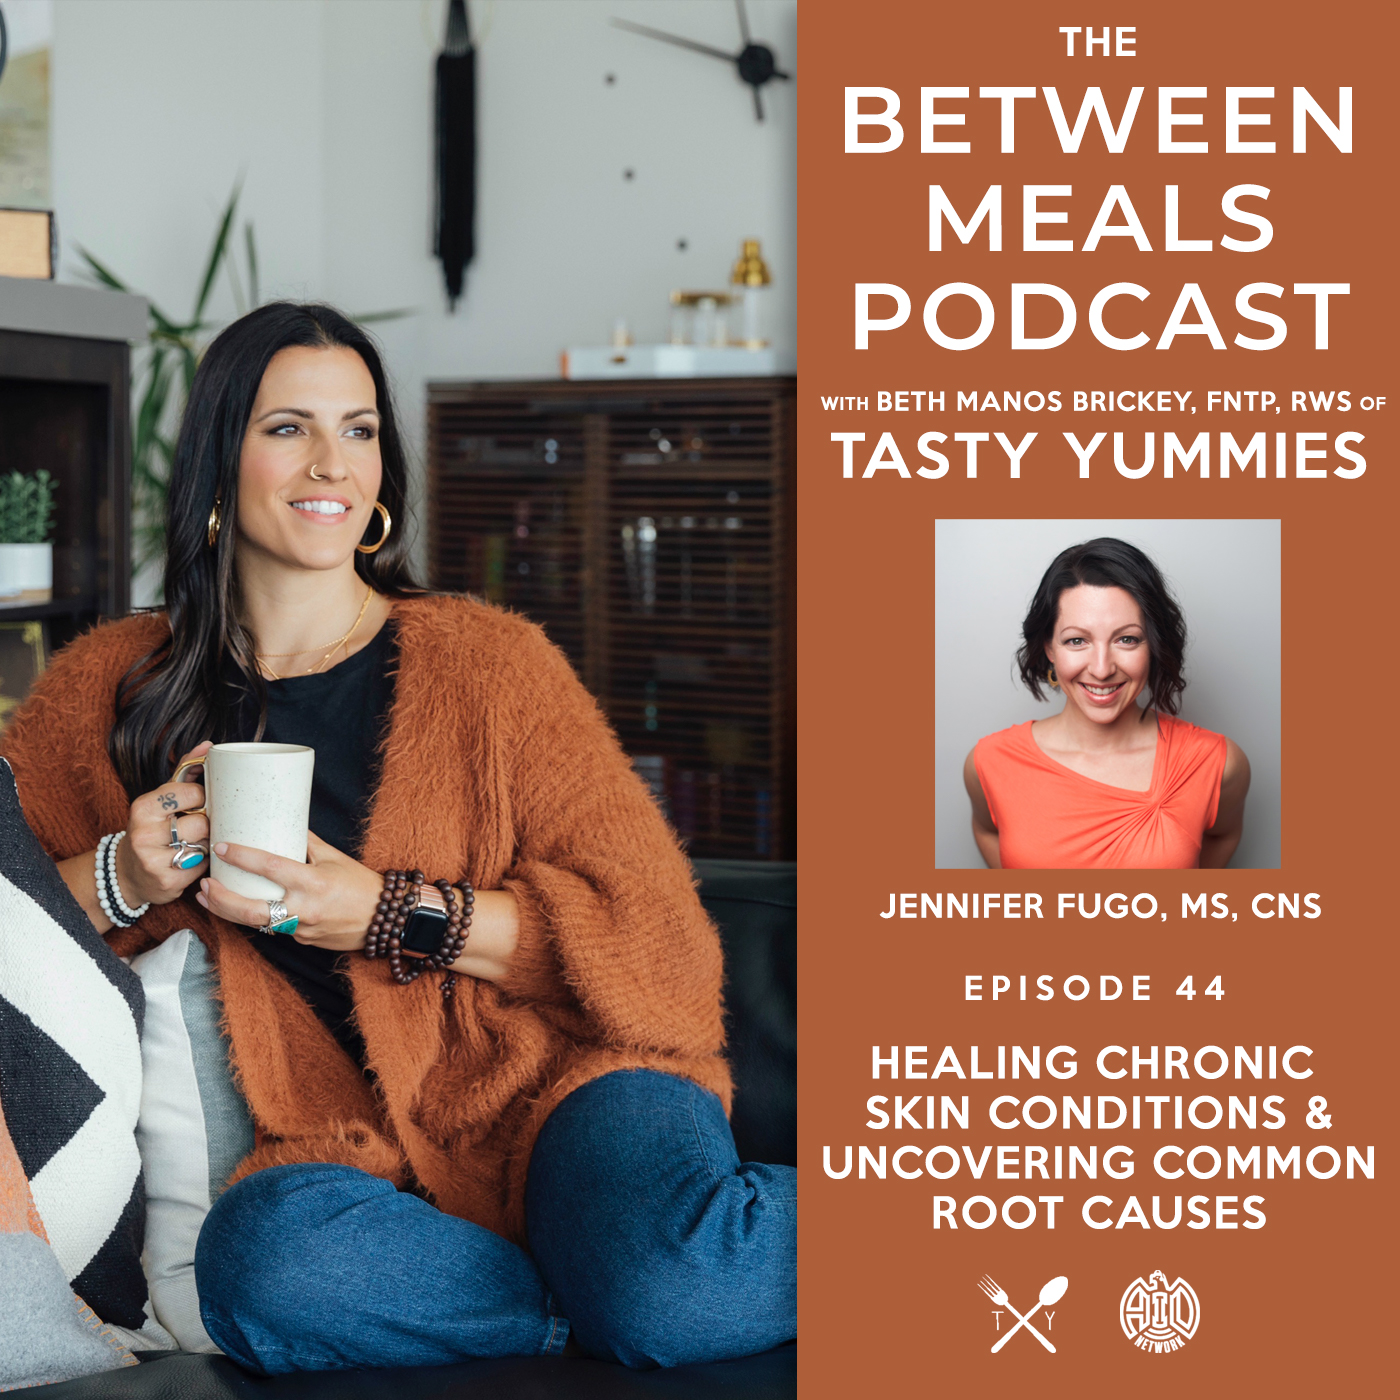 Between Meals Podcast. Episode 44: Healing Chronic Skin Conditions and Uncovering Common Root Causes